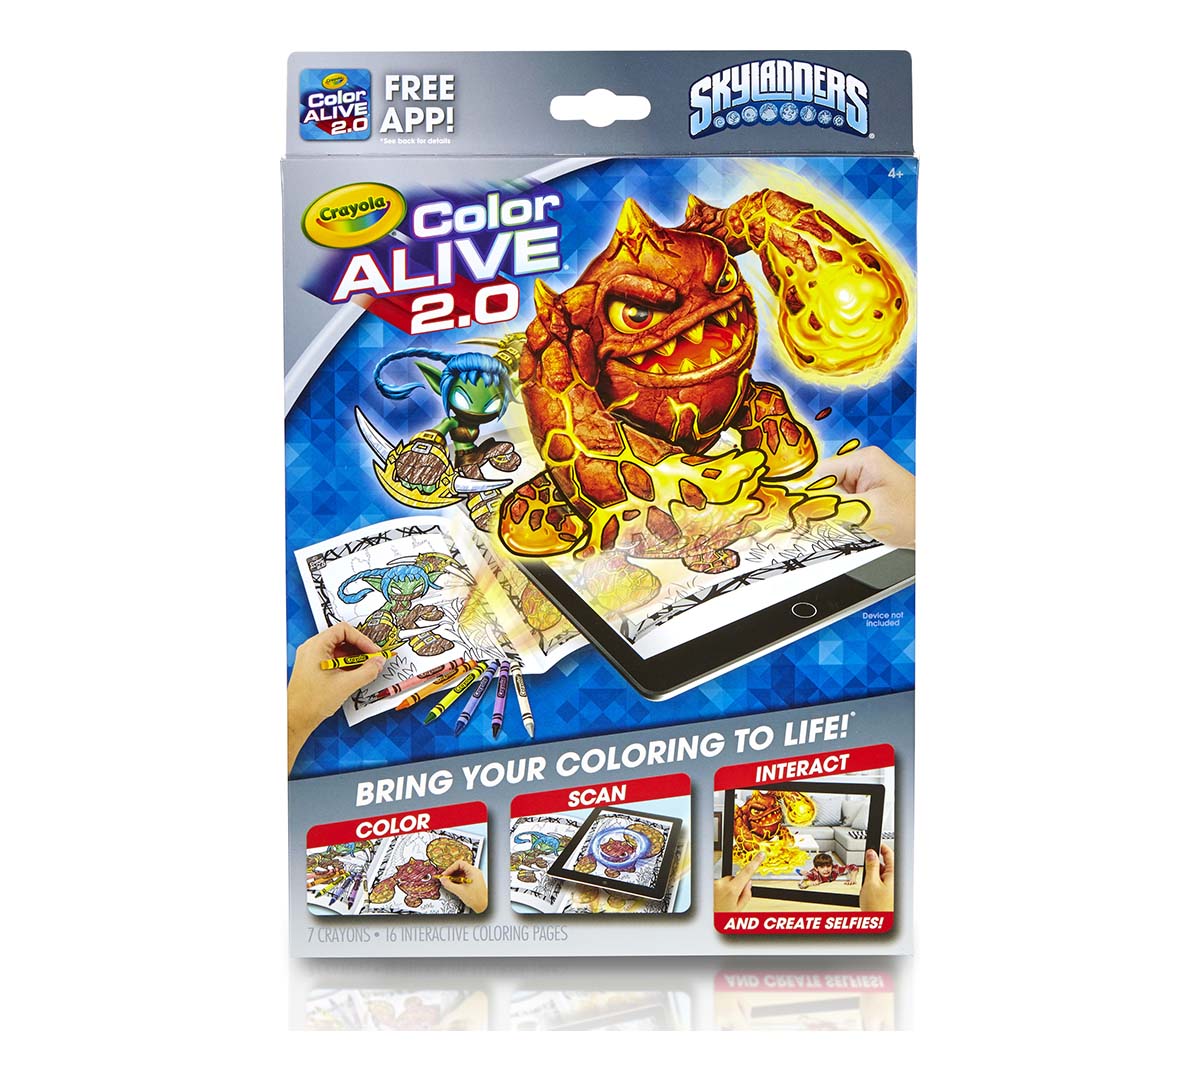 Crayola, Skylanders, Color Alive 220.20, Interactive Coloring Pages, Augmented  Reality, Art Tools, Coloring Pages, Crayons, Free App Included   Crayola